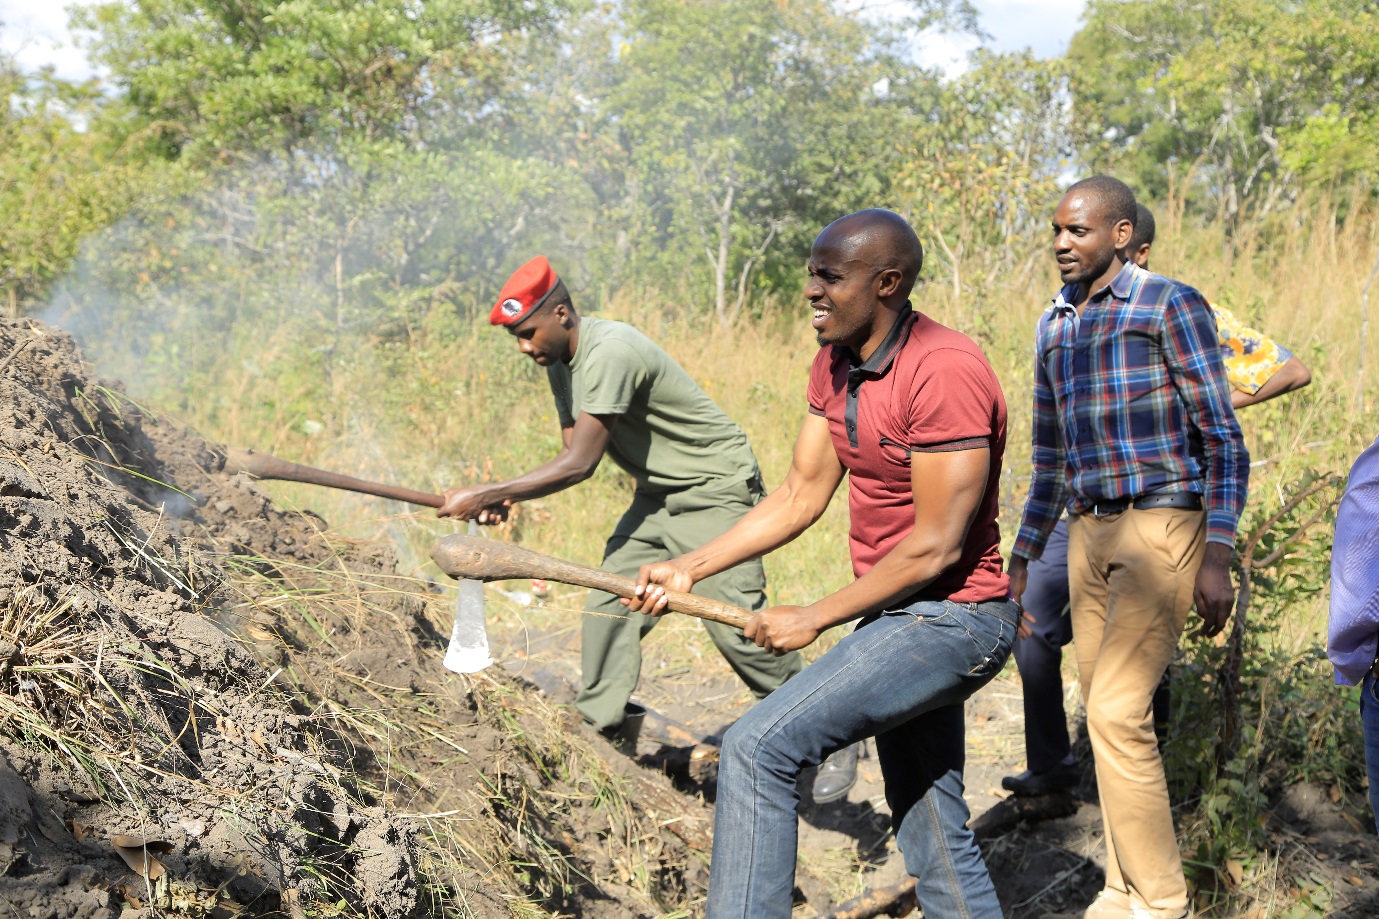 A project team demolishing a charcoal kiln spotted during a site visit in Lwafi Game Reserve